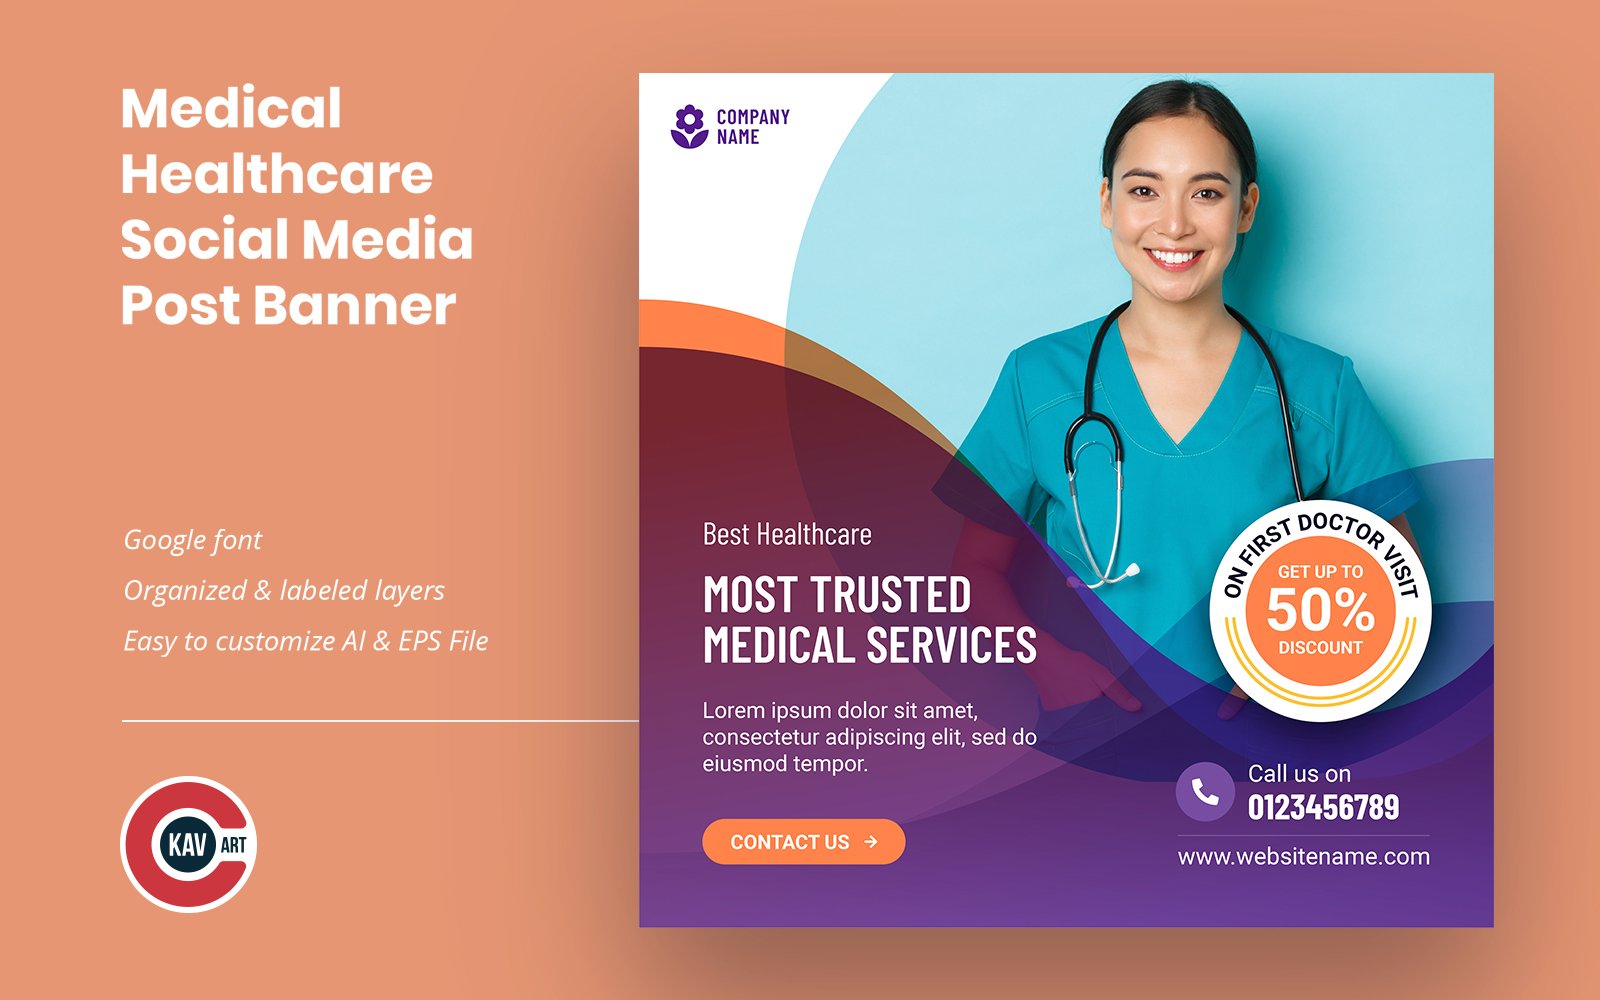 Medical Healthcare Services Social Media Post & Web Banner Template